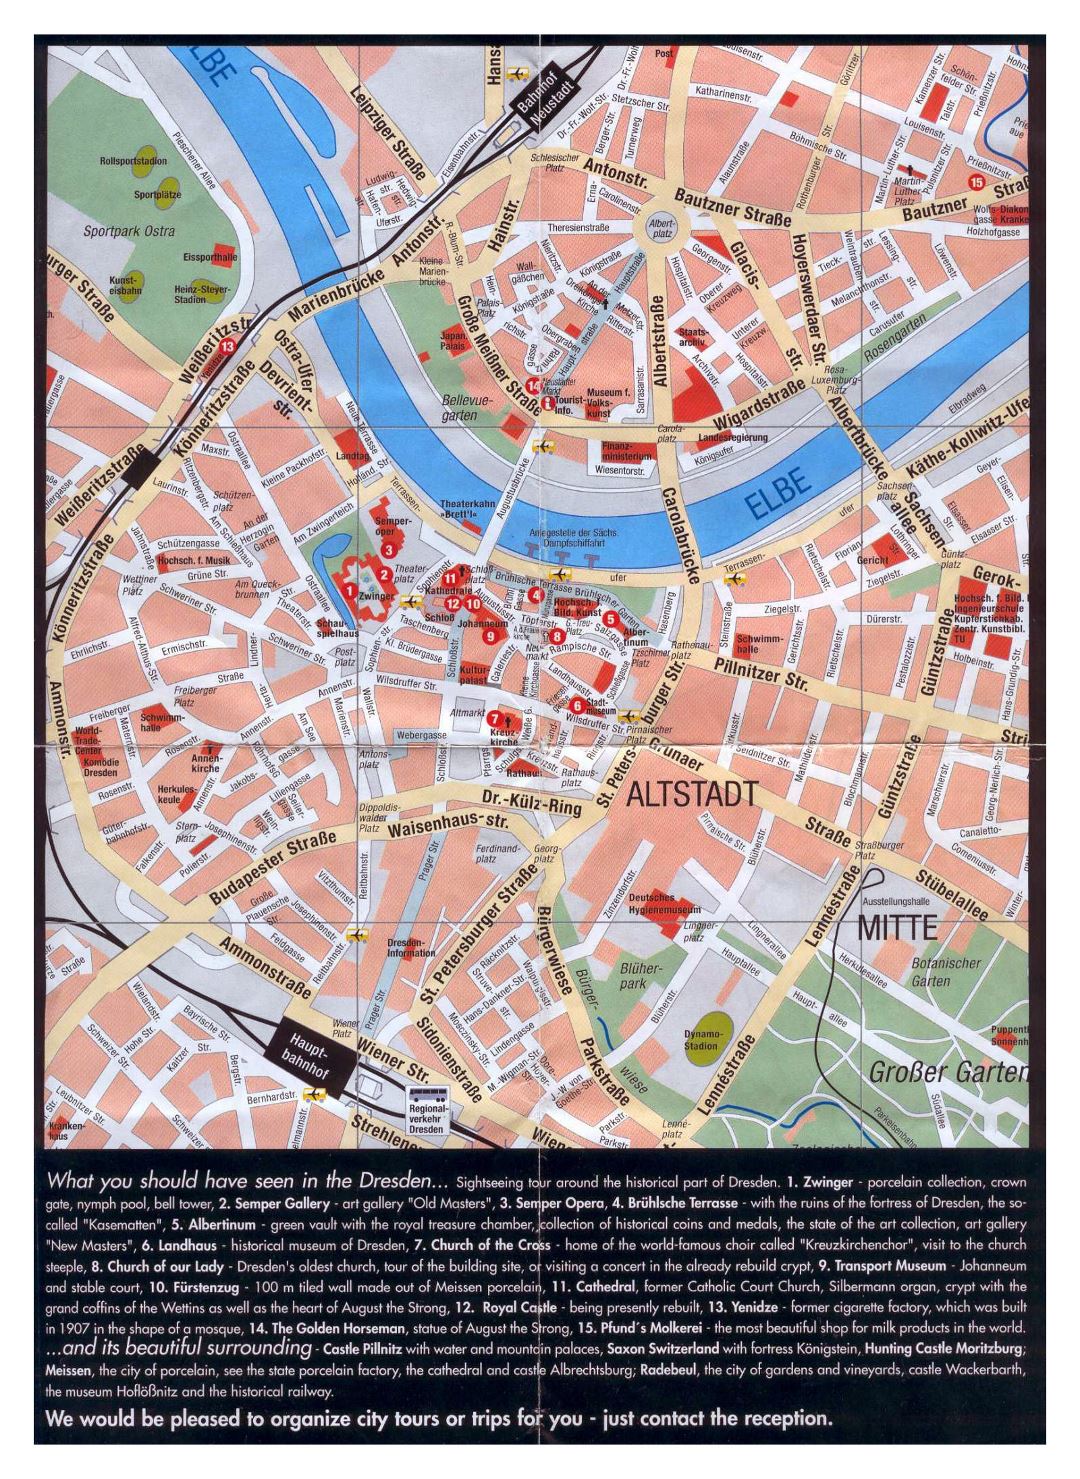 Large detailed tourist map of central part of Dresden city